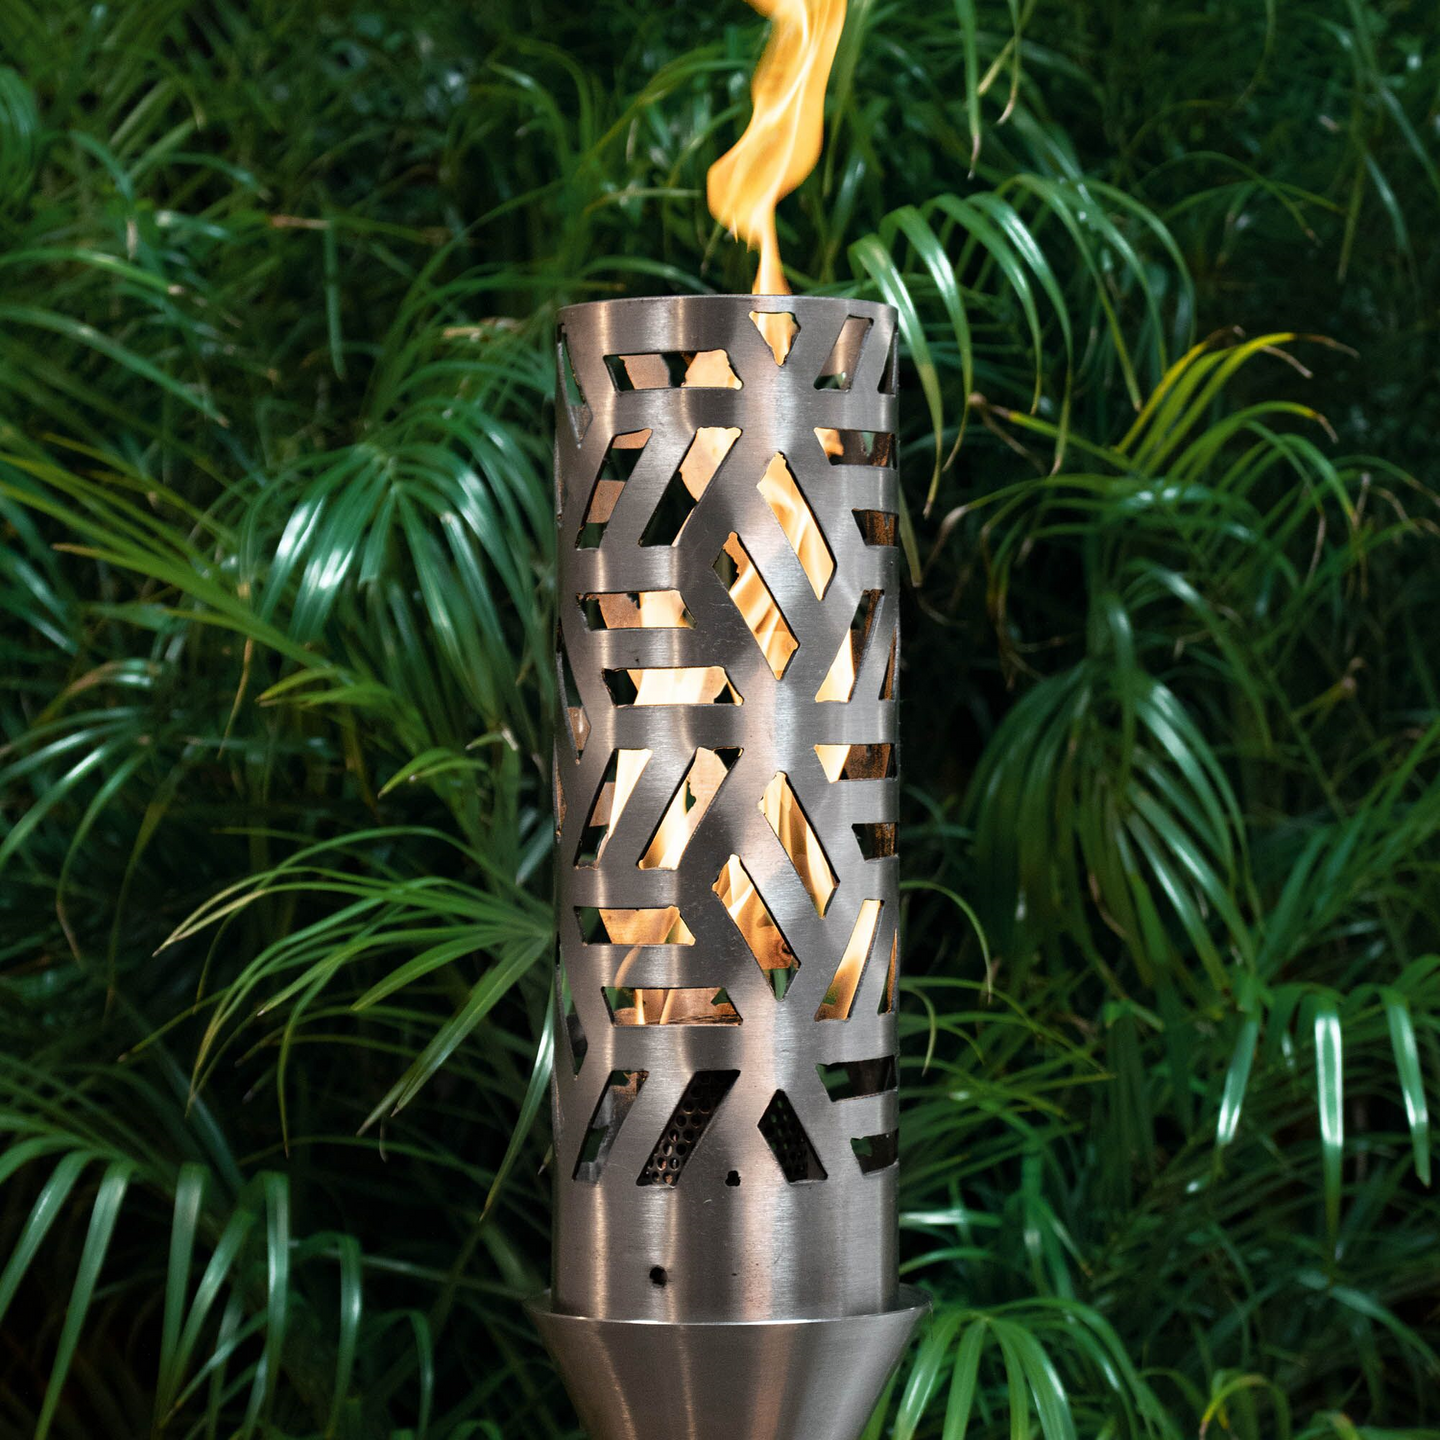 The Outdoor Plus Cubist Fire Torch / Stainless Steel + Free Cover - The Fire Pit Collection